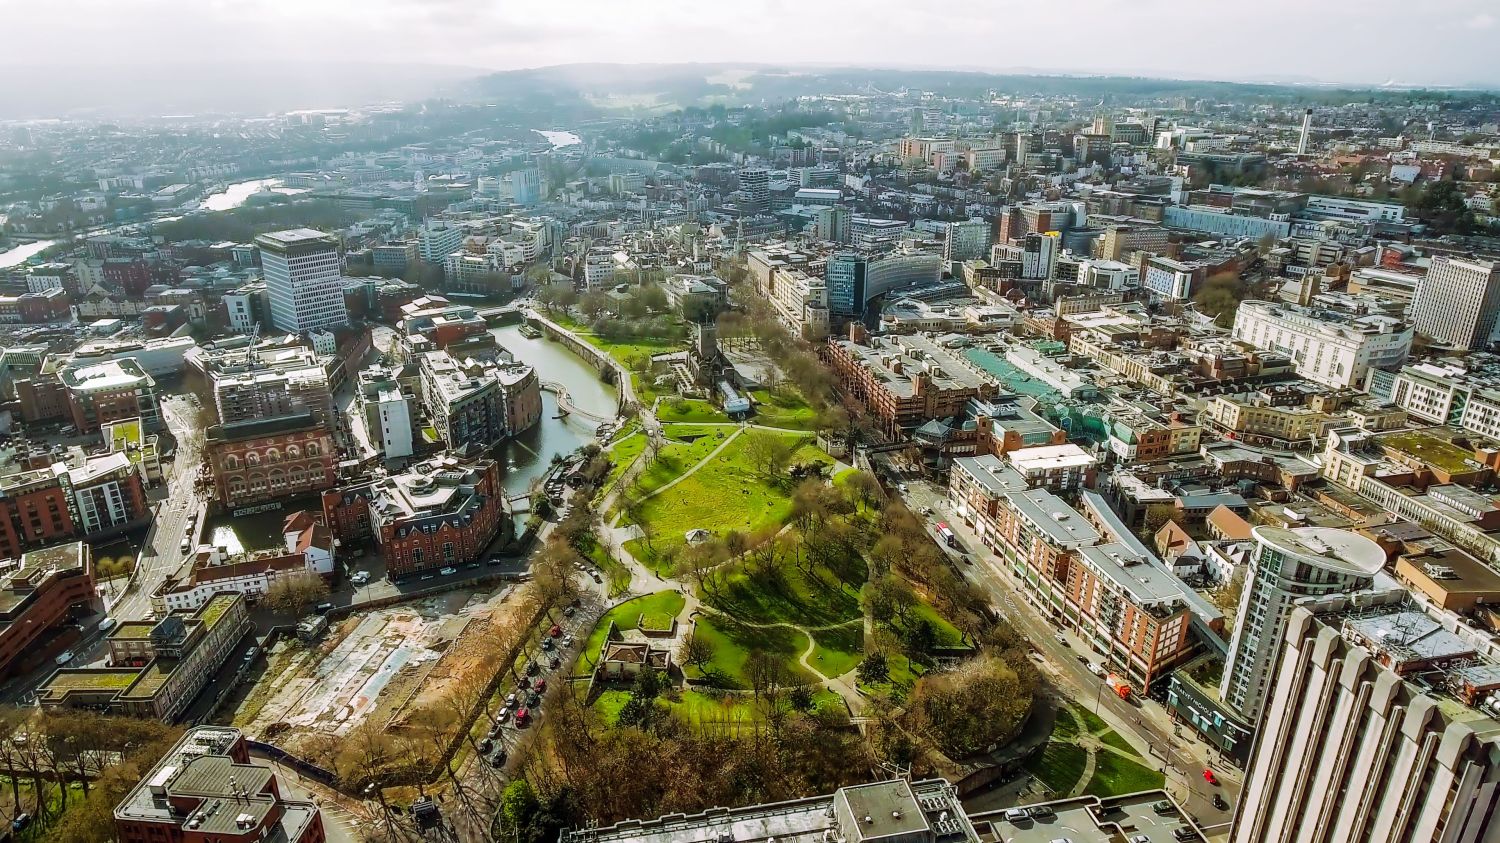 Bristol City Center Aerial View in England UK